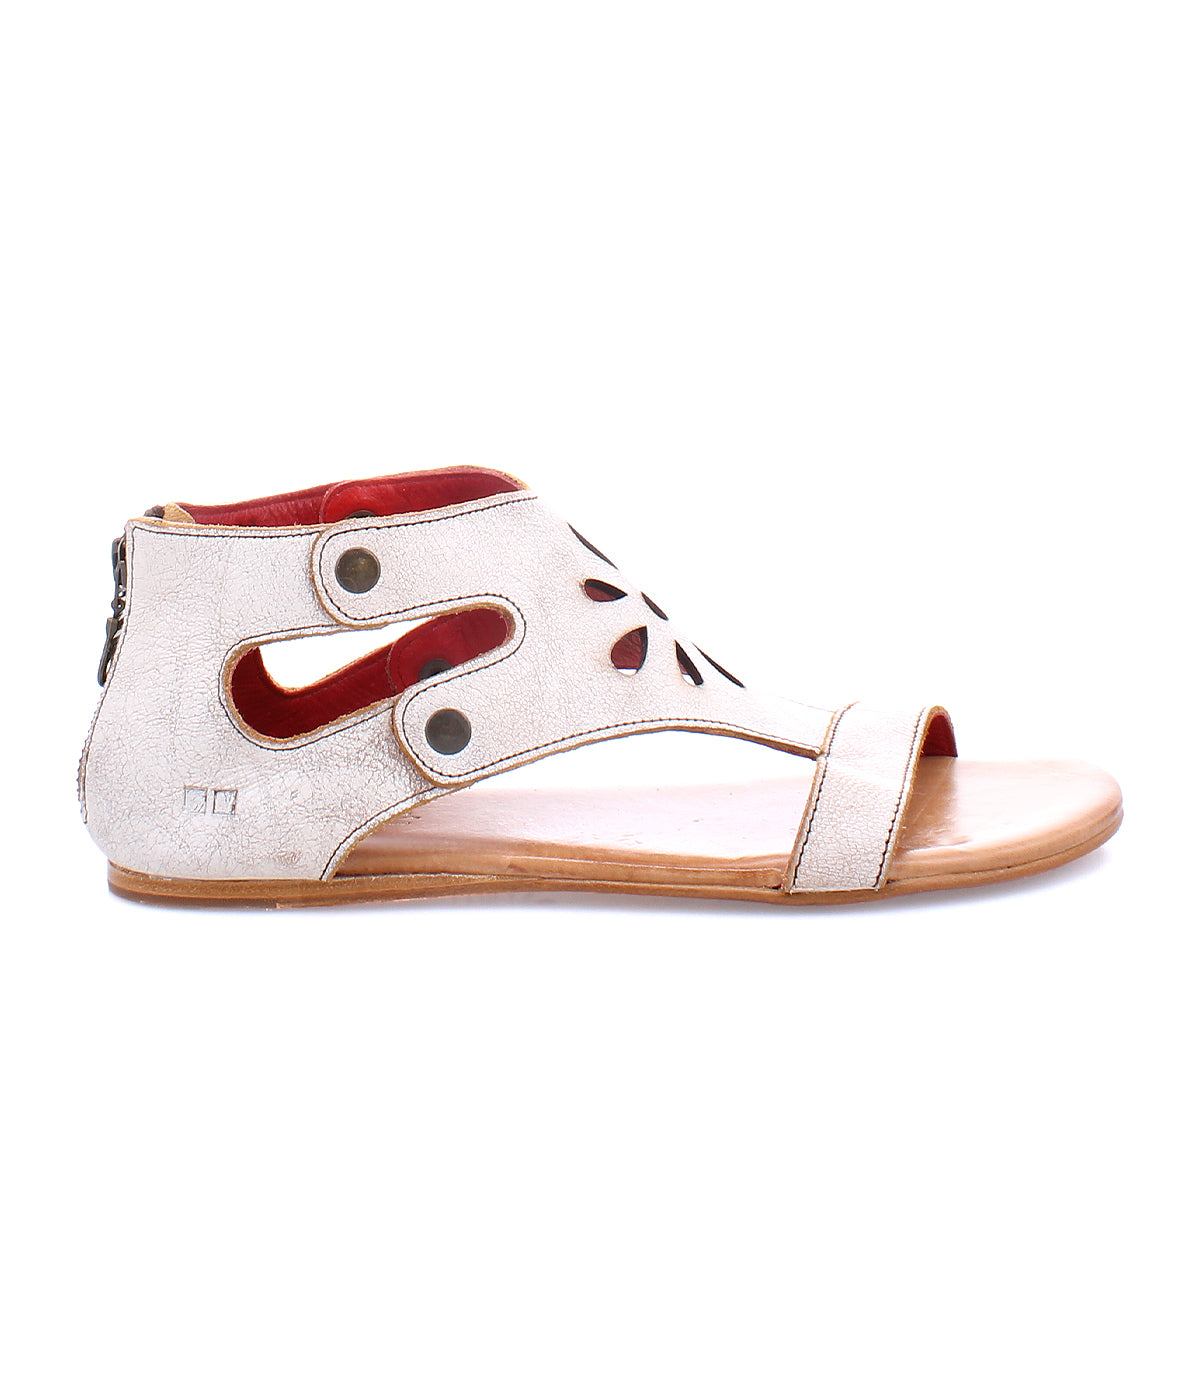 A white sandal for women with a cut out detail, featuring a flat leather design, the Soto CW by Bed Stu.